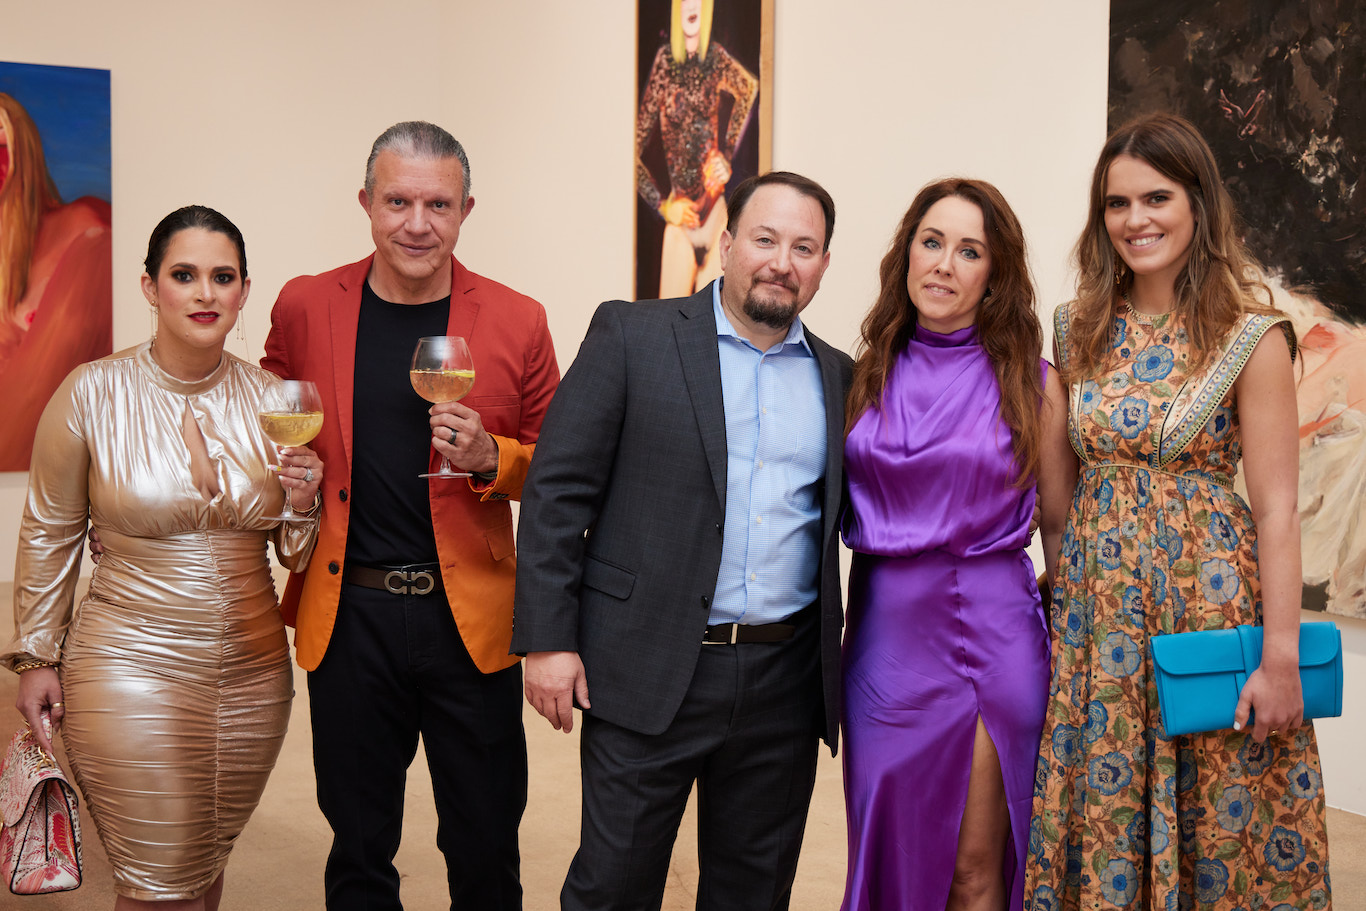 The Macallan Celebrates International Women’s Day At The Rubell Museum